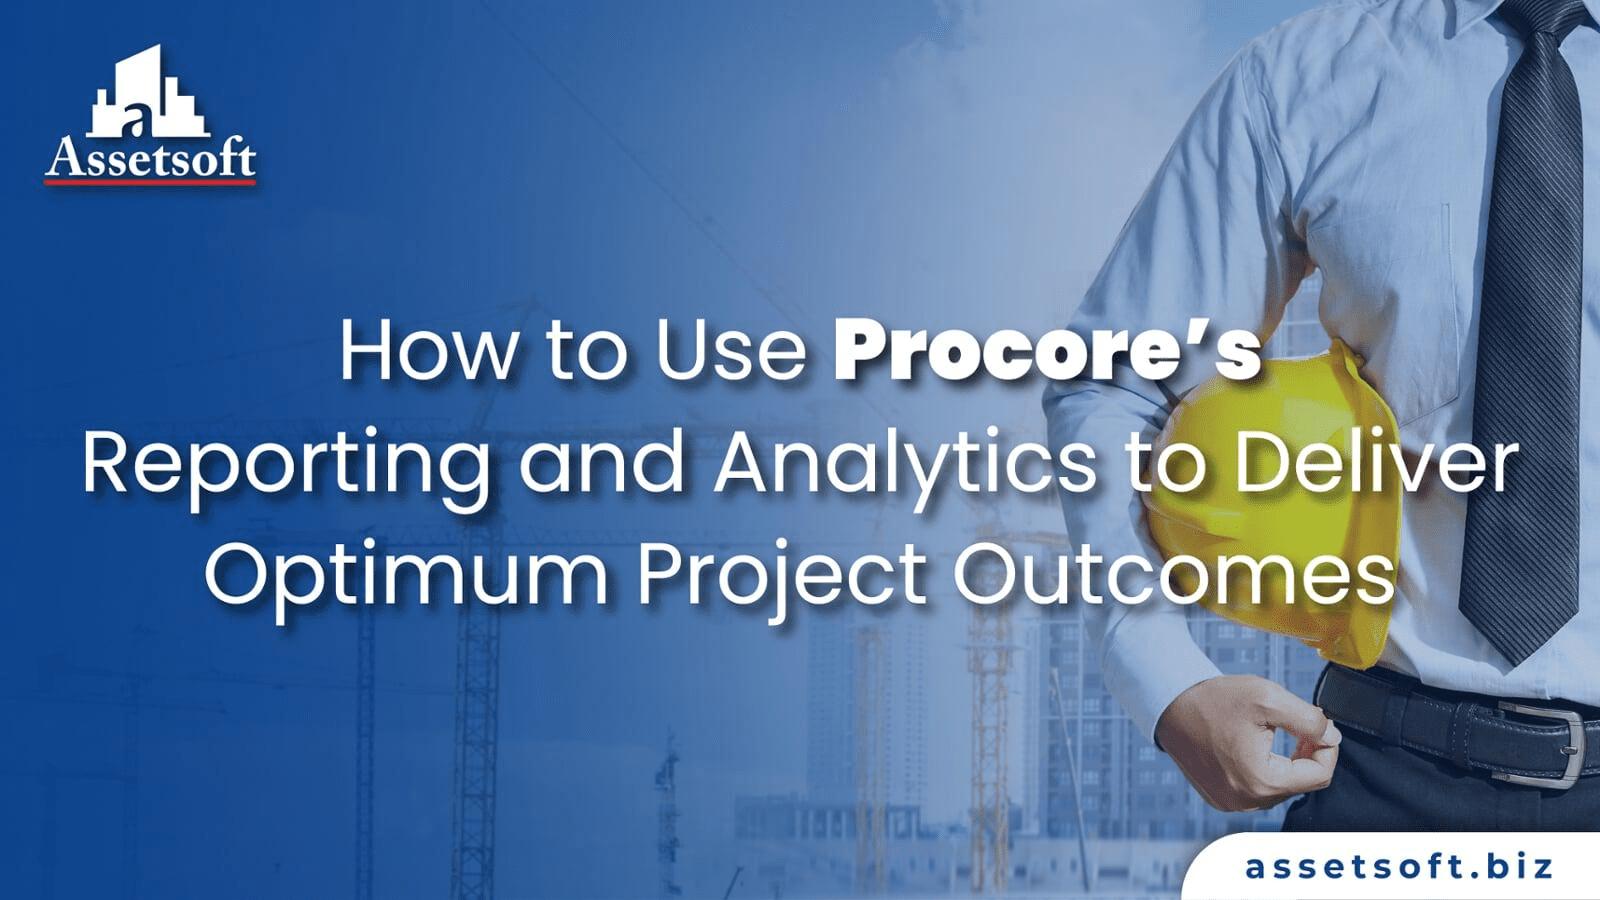 How to Use Procore's Reporting and Analytics to Deliver Optimum Project Outcomes